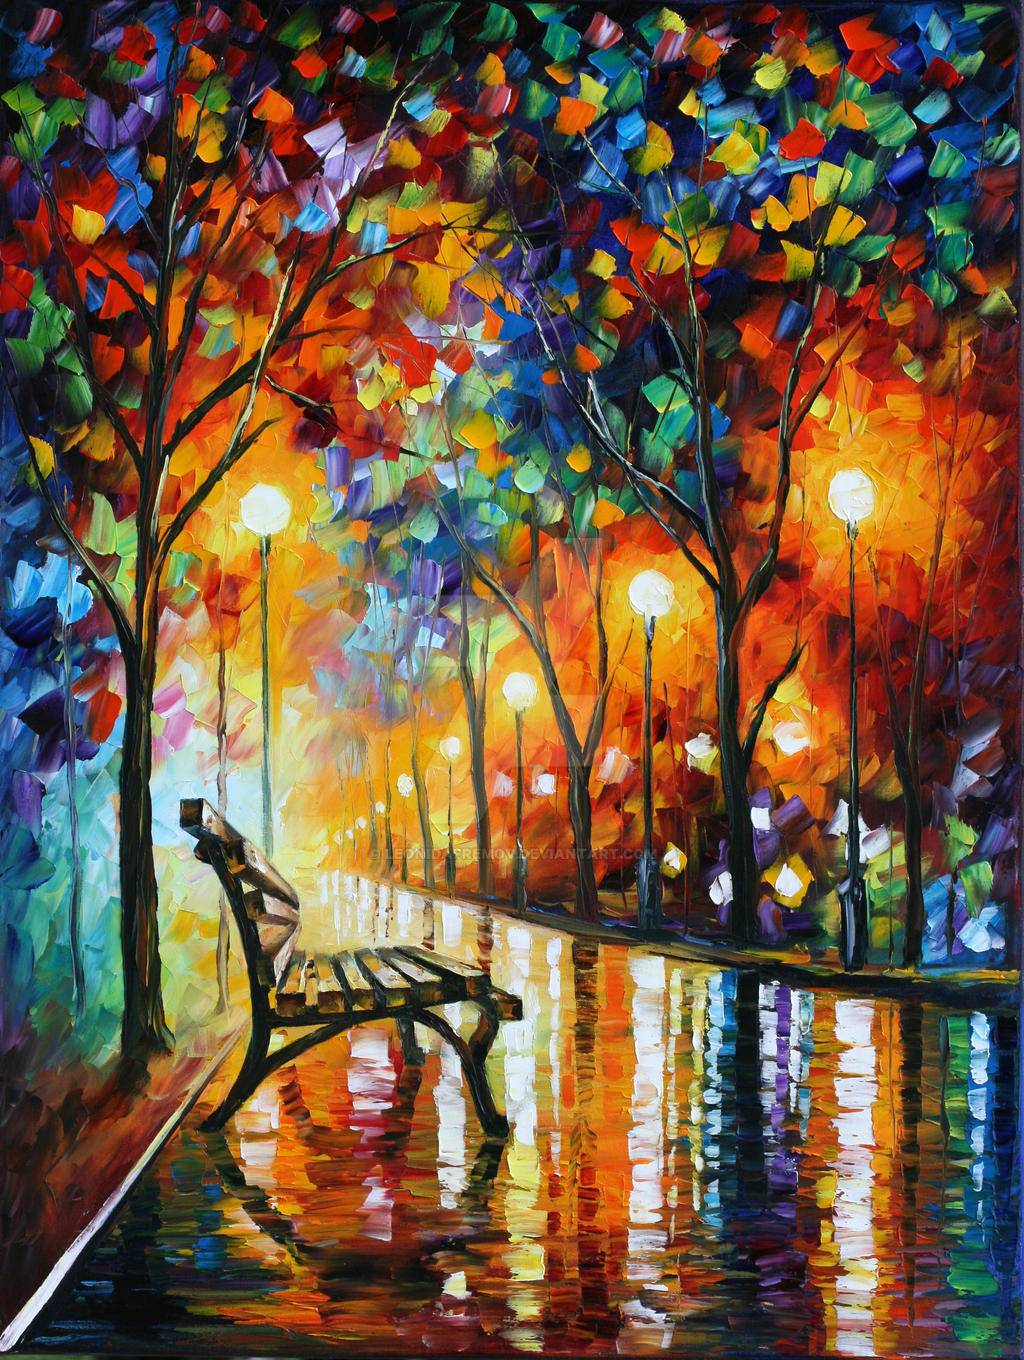 Loneliness of Autumn by Leonid Afremov